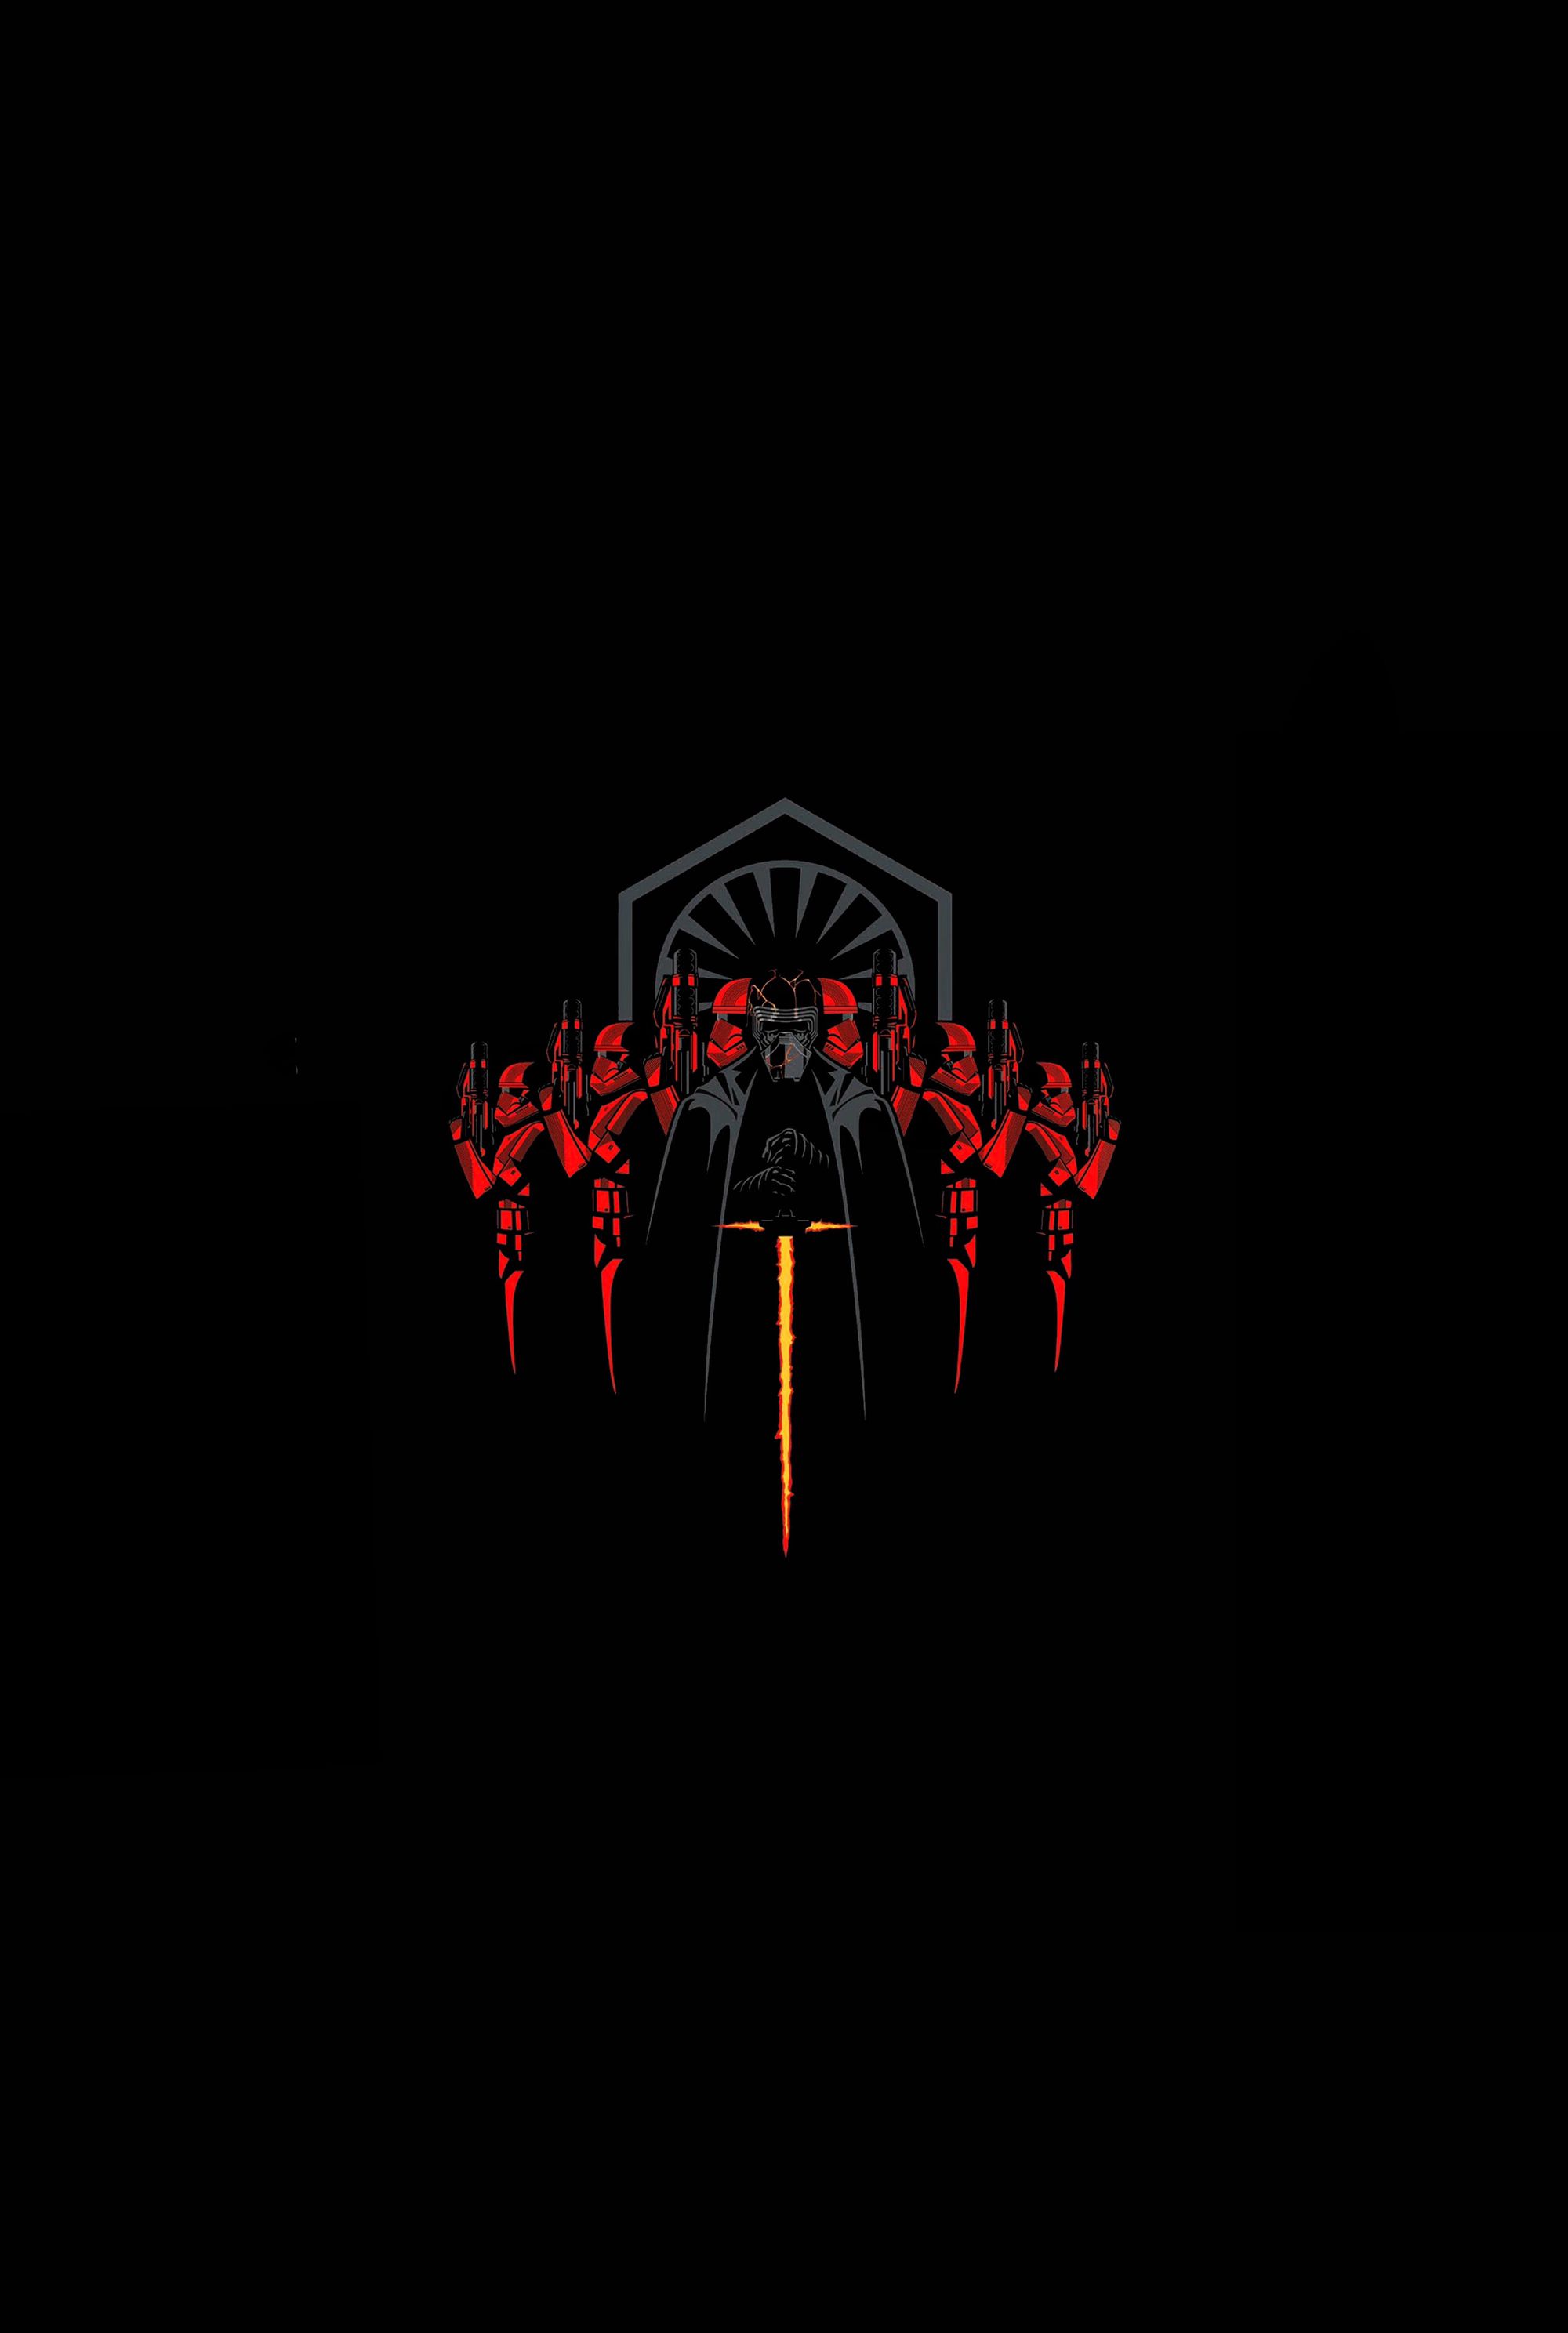 An improved version of the “Sith Order” wallpaper I